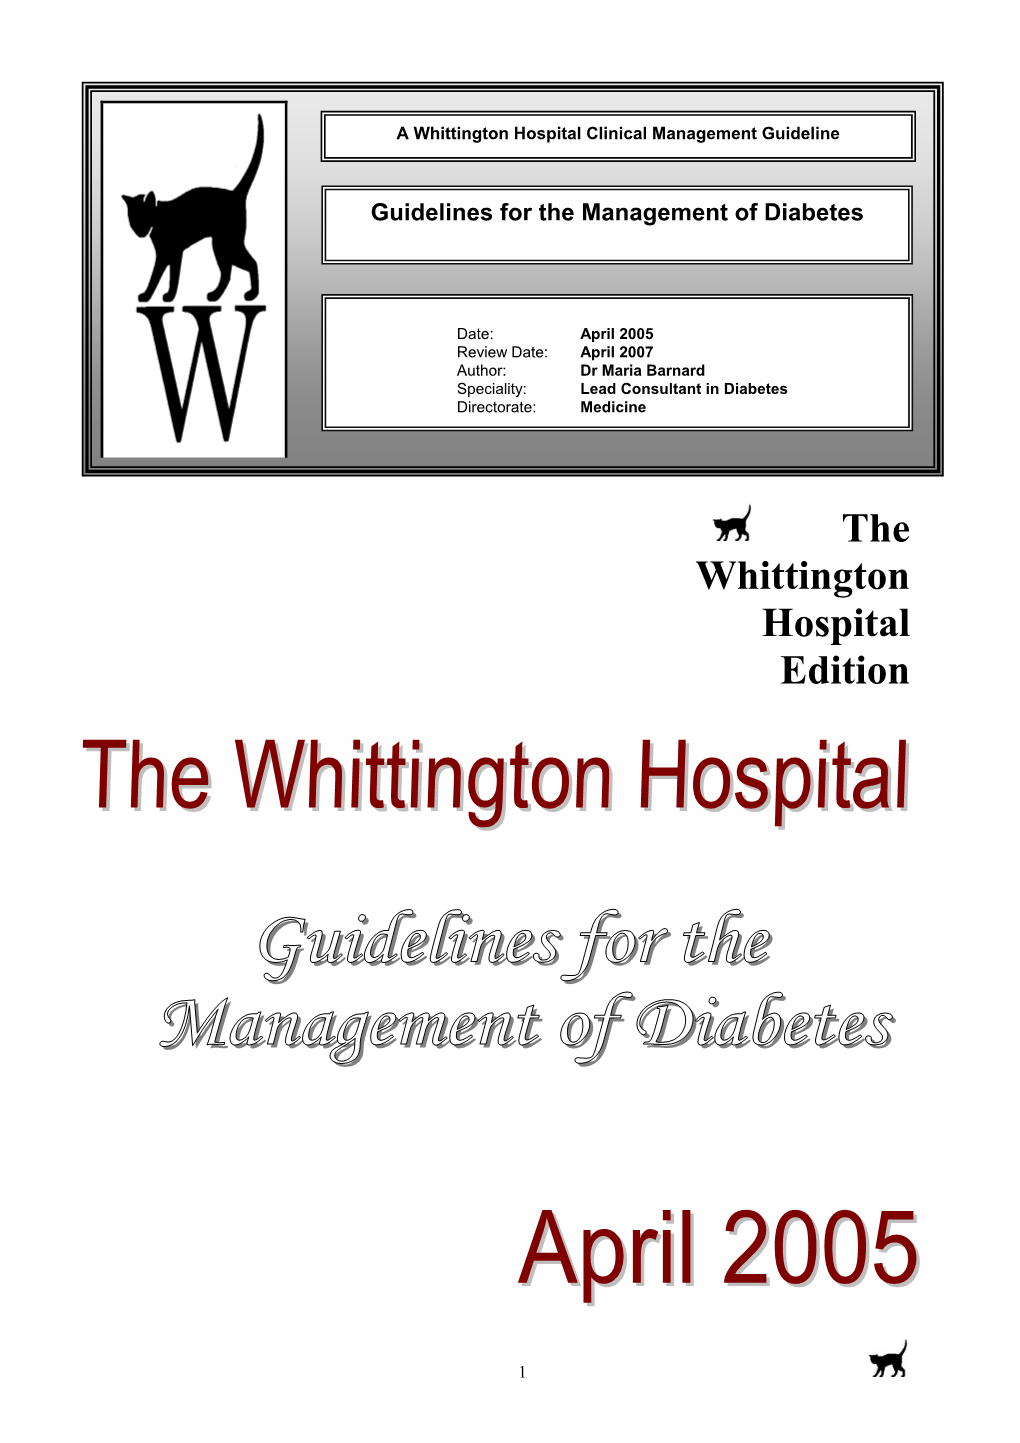 Guidelines for the Management of Diabetes